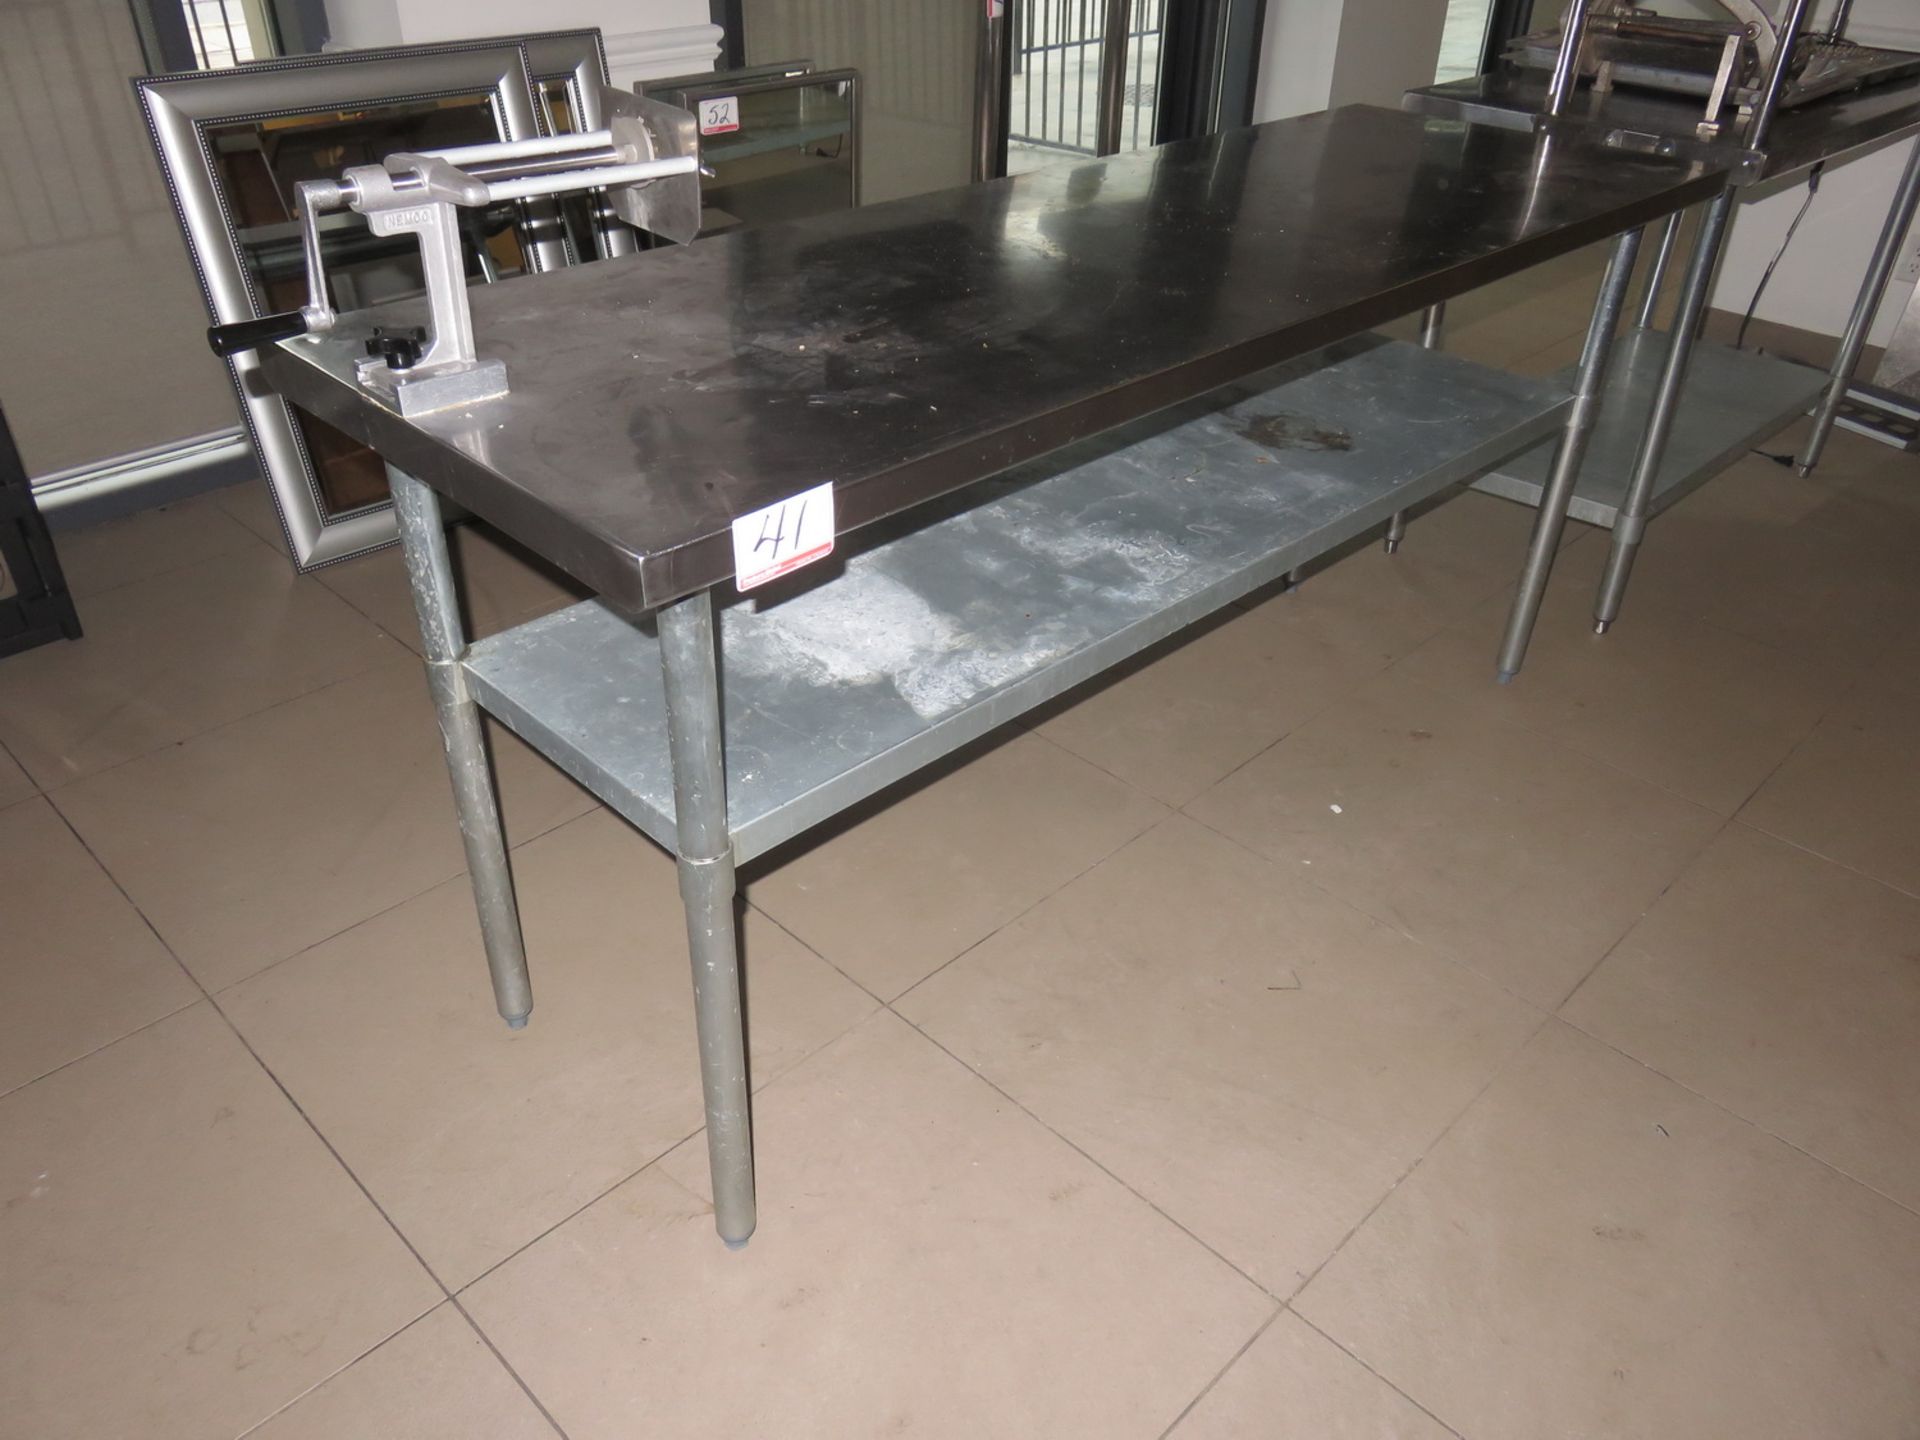 STEEL & STAINLESS 2' X 6' PREP TABLE W/ NEMCO RIBBON FRY CUTTER